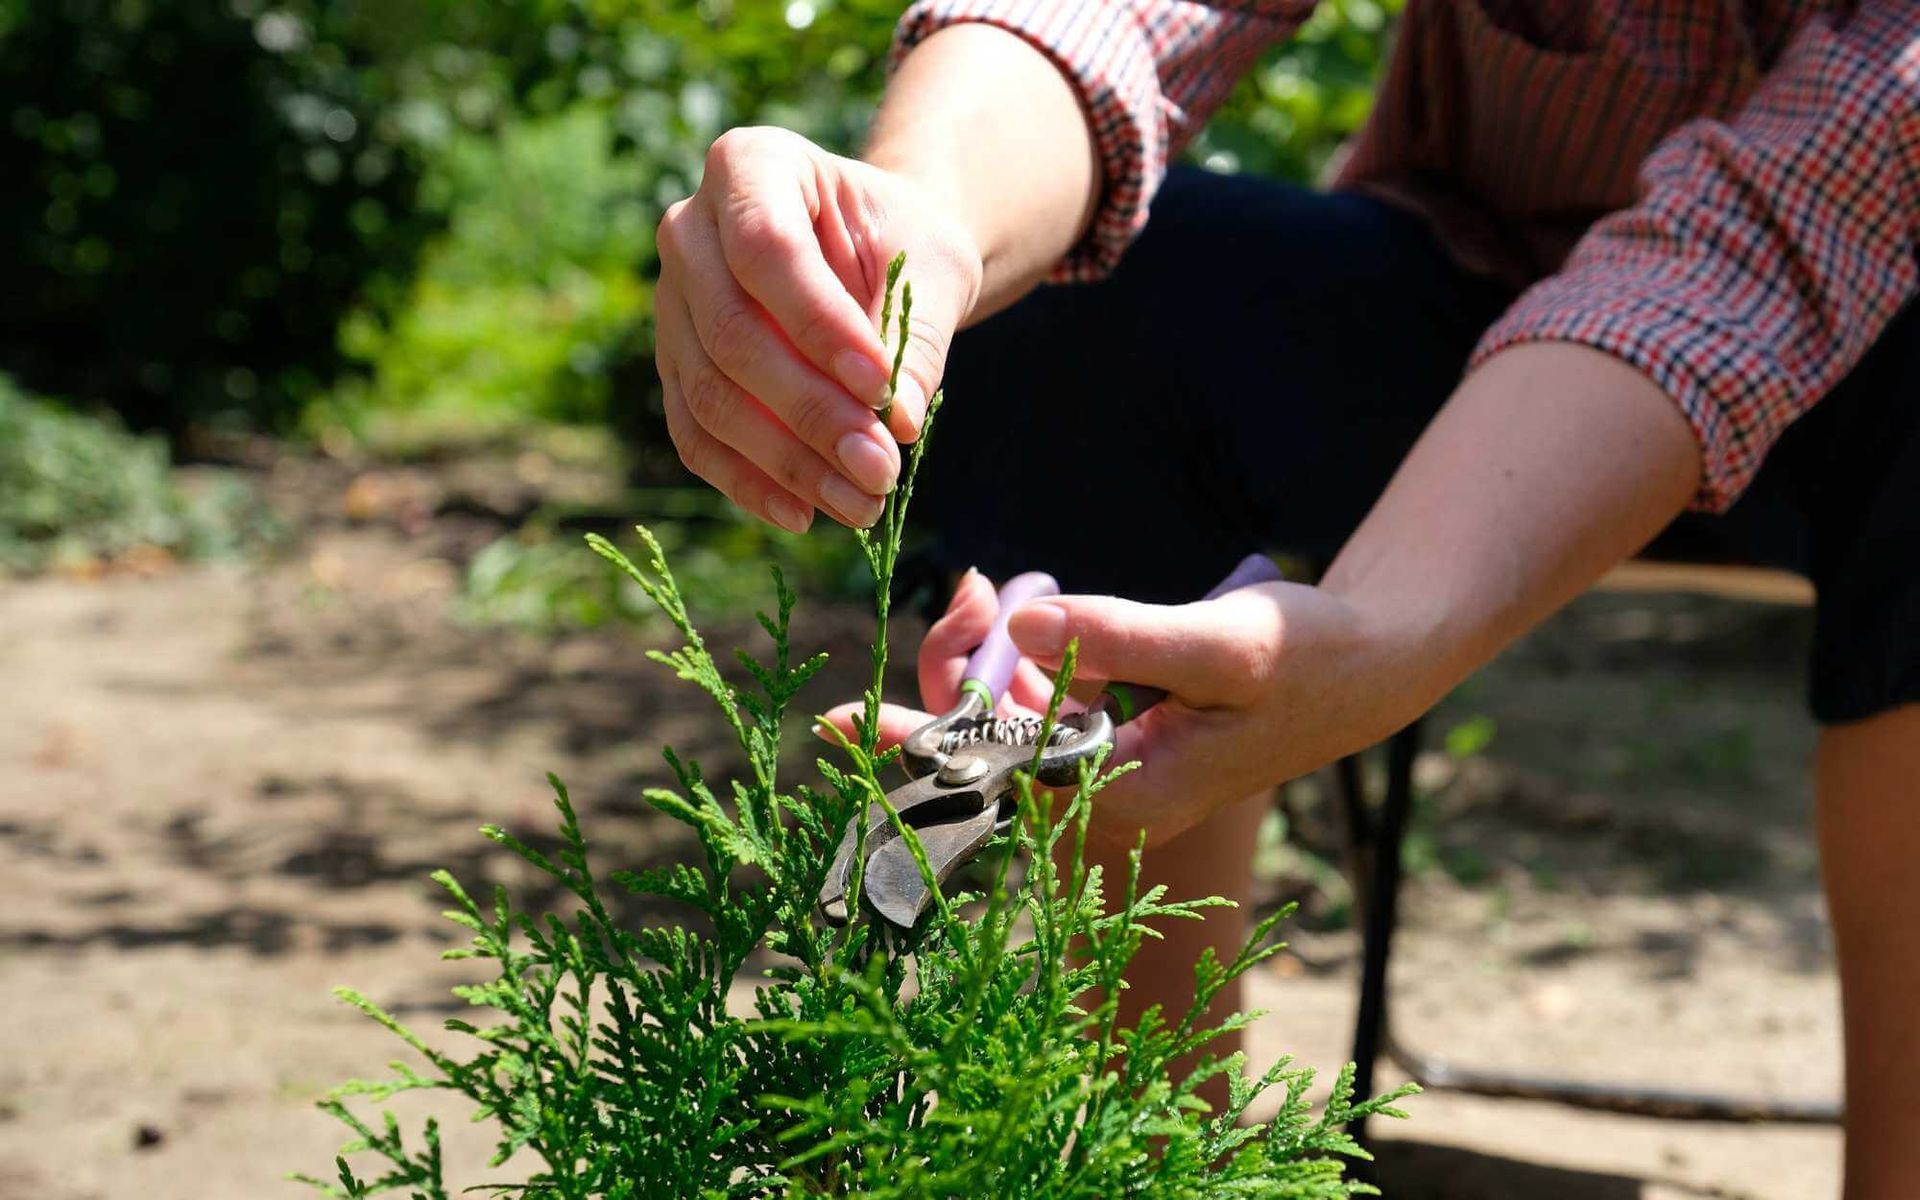 gardener pruning a young thuja tree